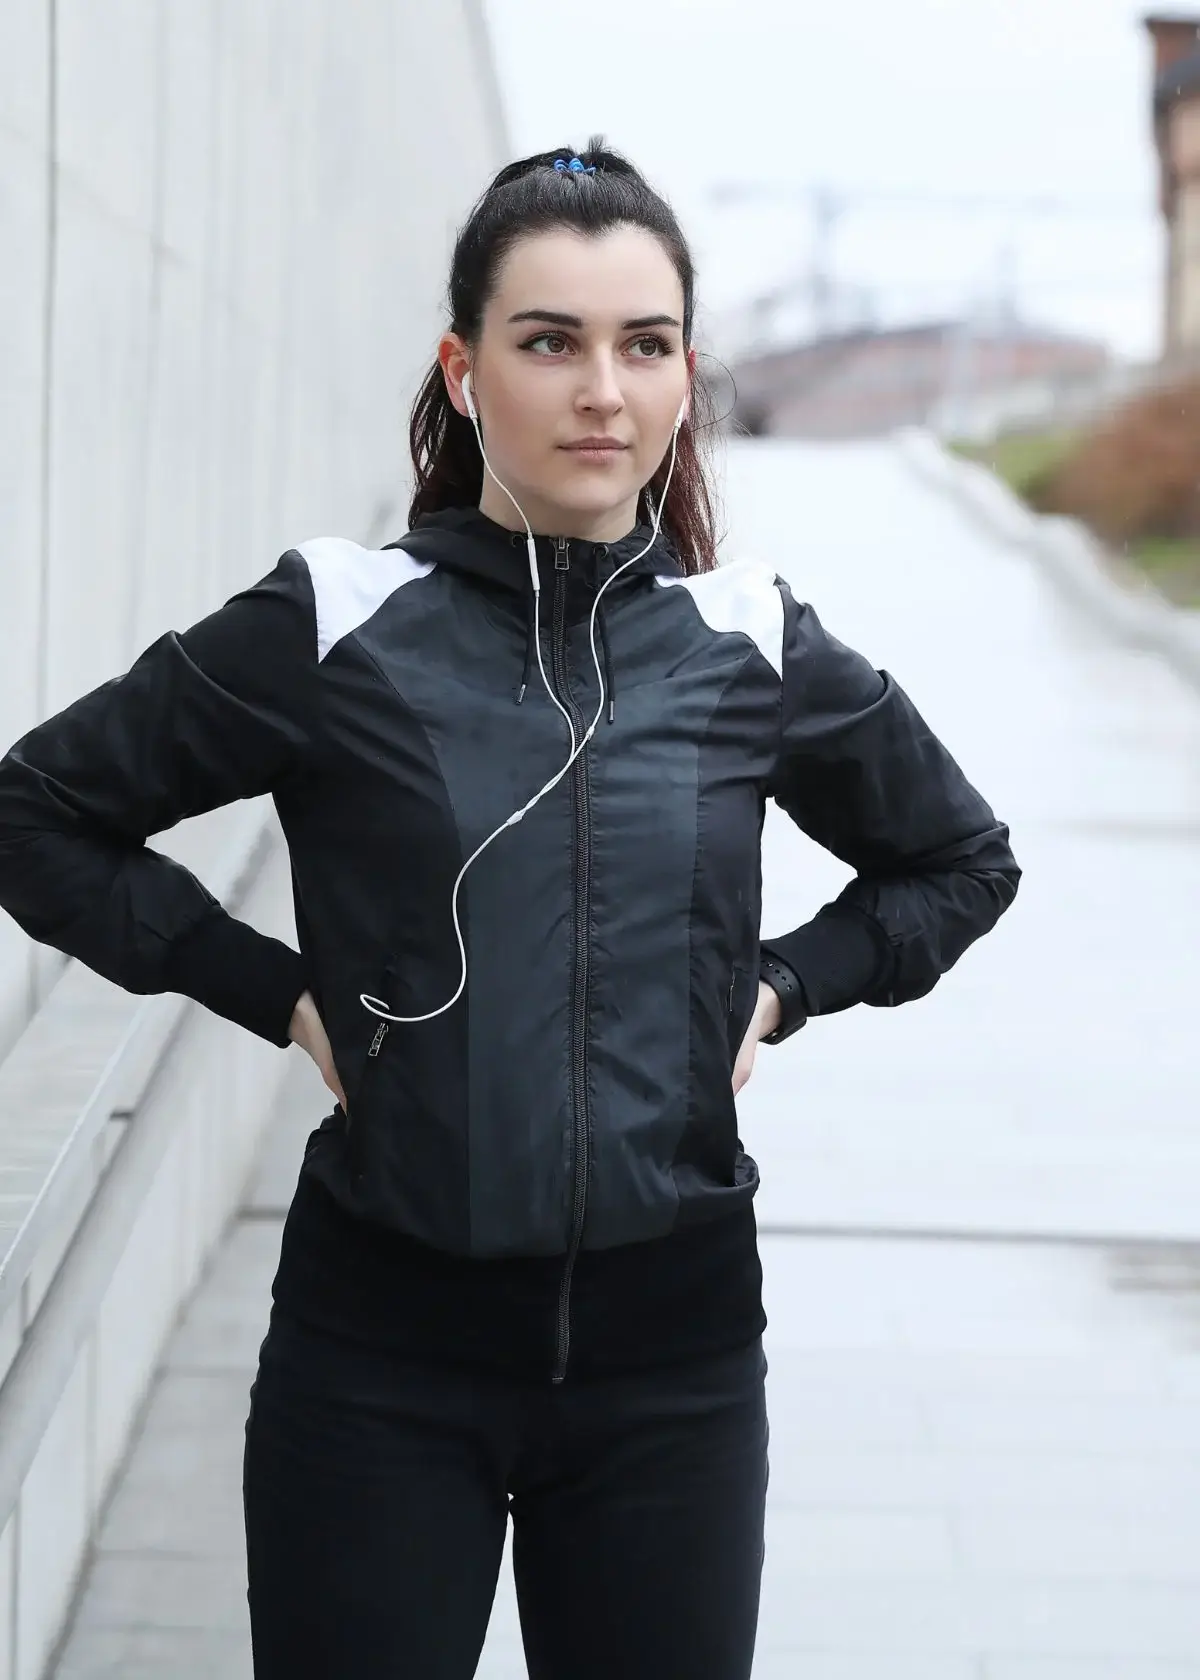 How to choose the right Lululemon Define Jacket?